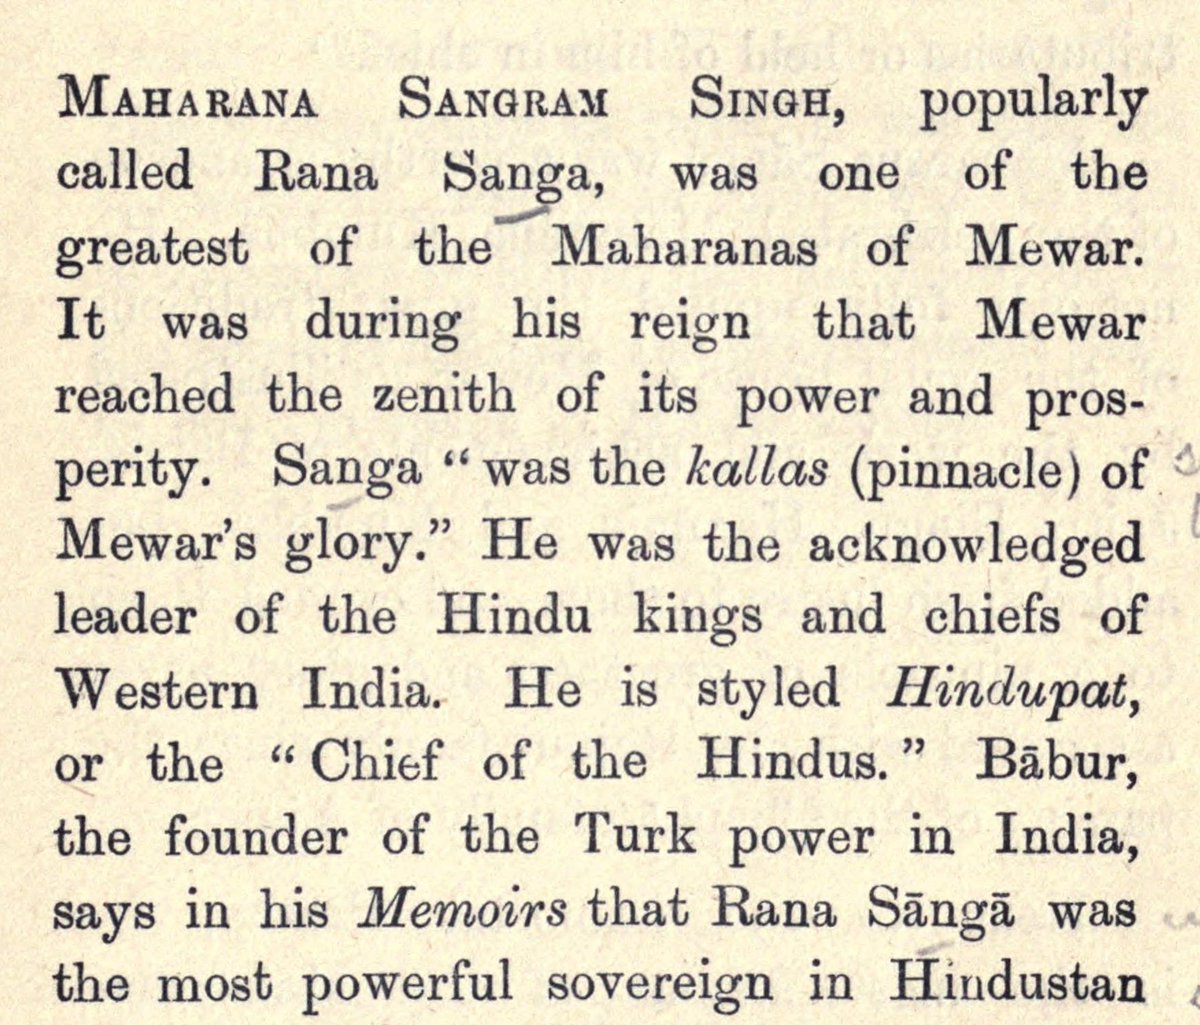 strong as his grandfather Rana Kumbha. Despite losing his one arm, one eye and numerous other grave injuries, he continued fighting his enemies. Sanga was very modest & generous by nature. The immense power, superiority or the zenith of opulence never made him arrogant or proud.